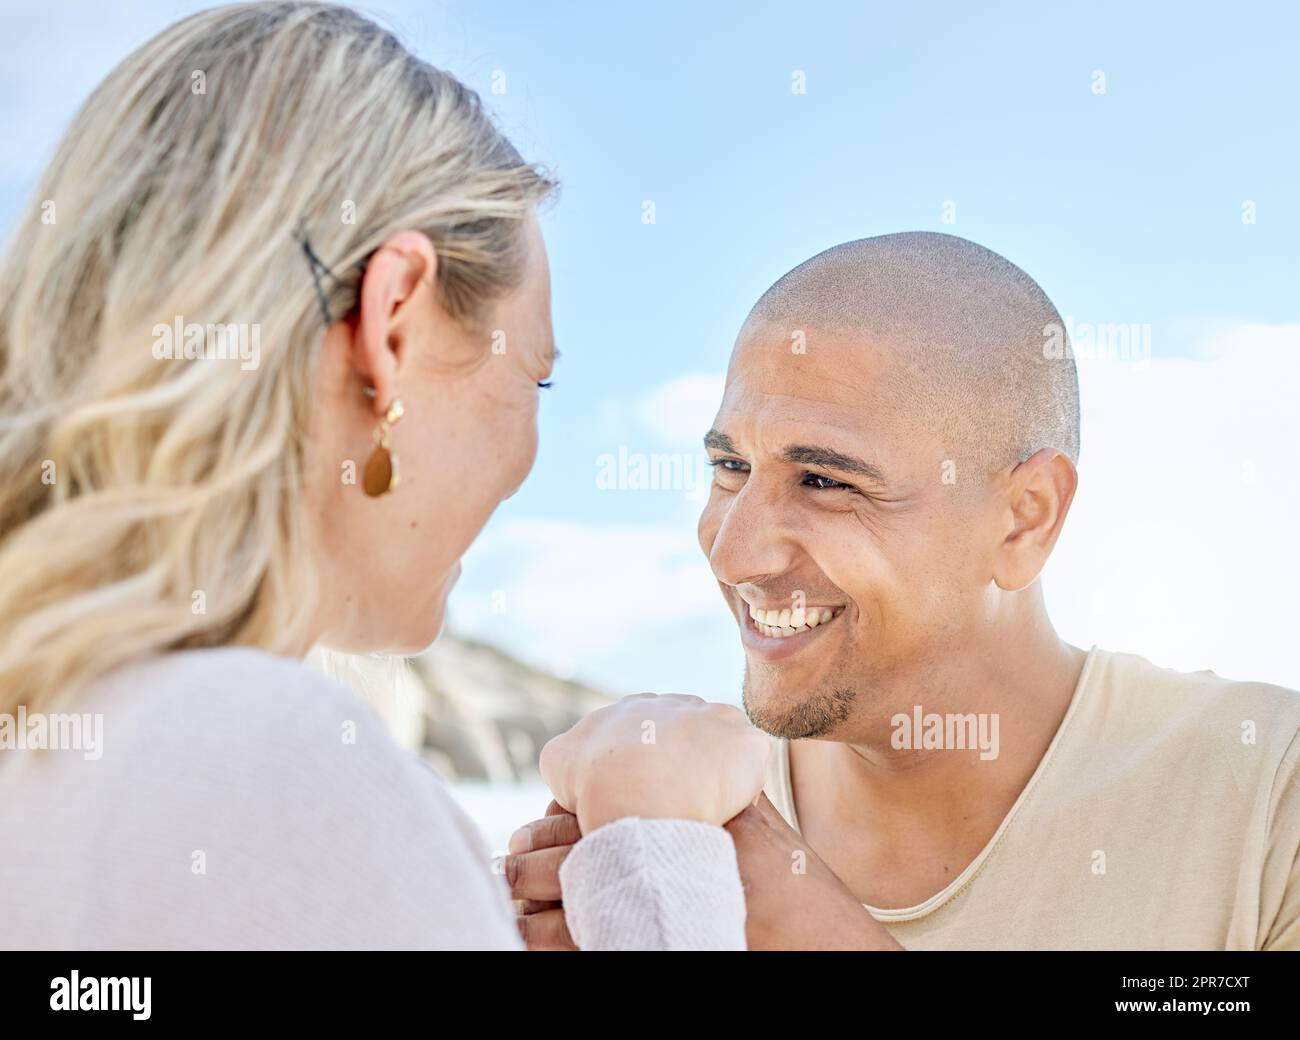 A young man proposing to his girlfriend at the beach in summer. Happy interracial couple holding hands and smiling. Soon to be husband and wife staring lovingly into one anothers eyes outside Stock Photo